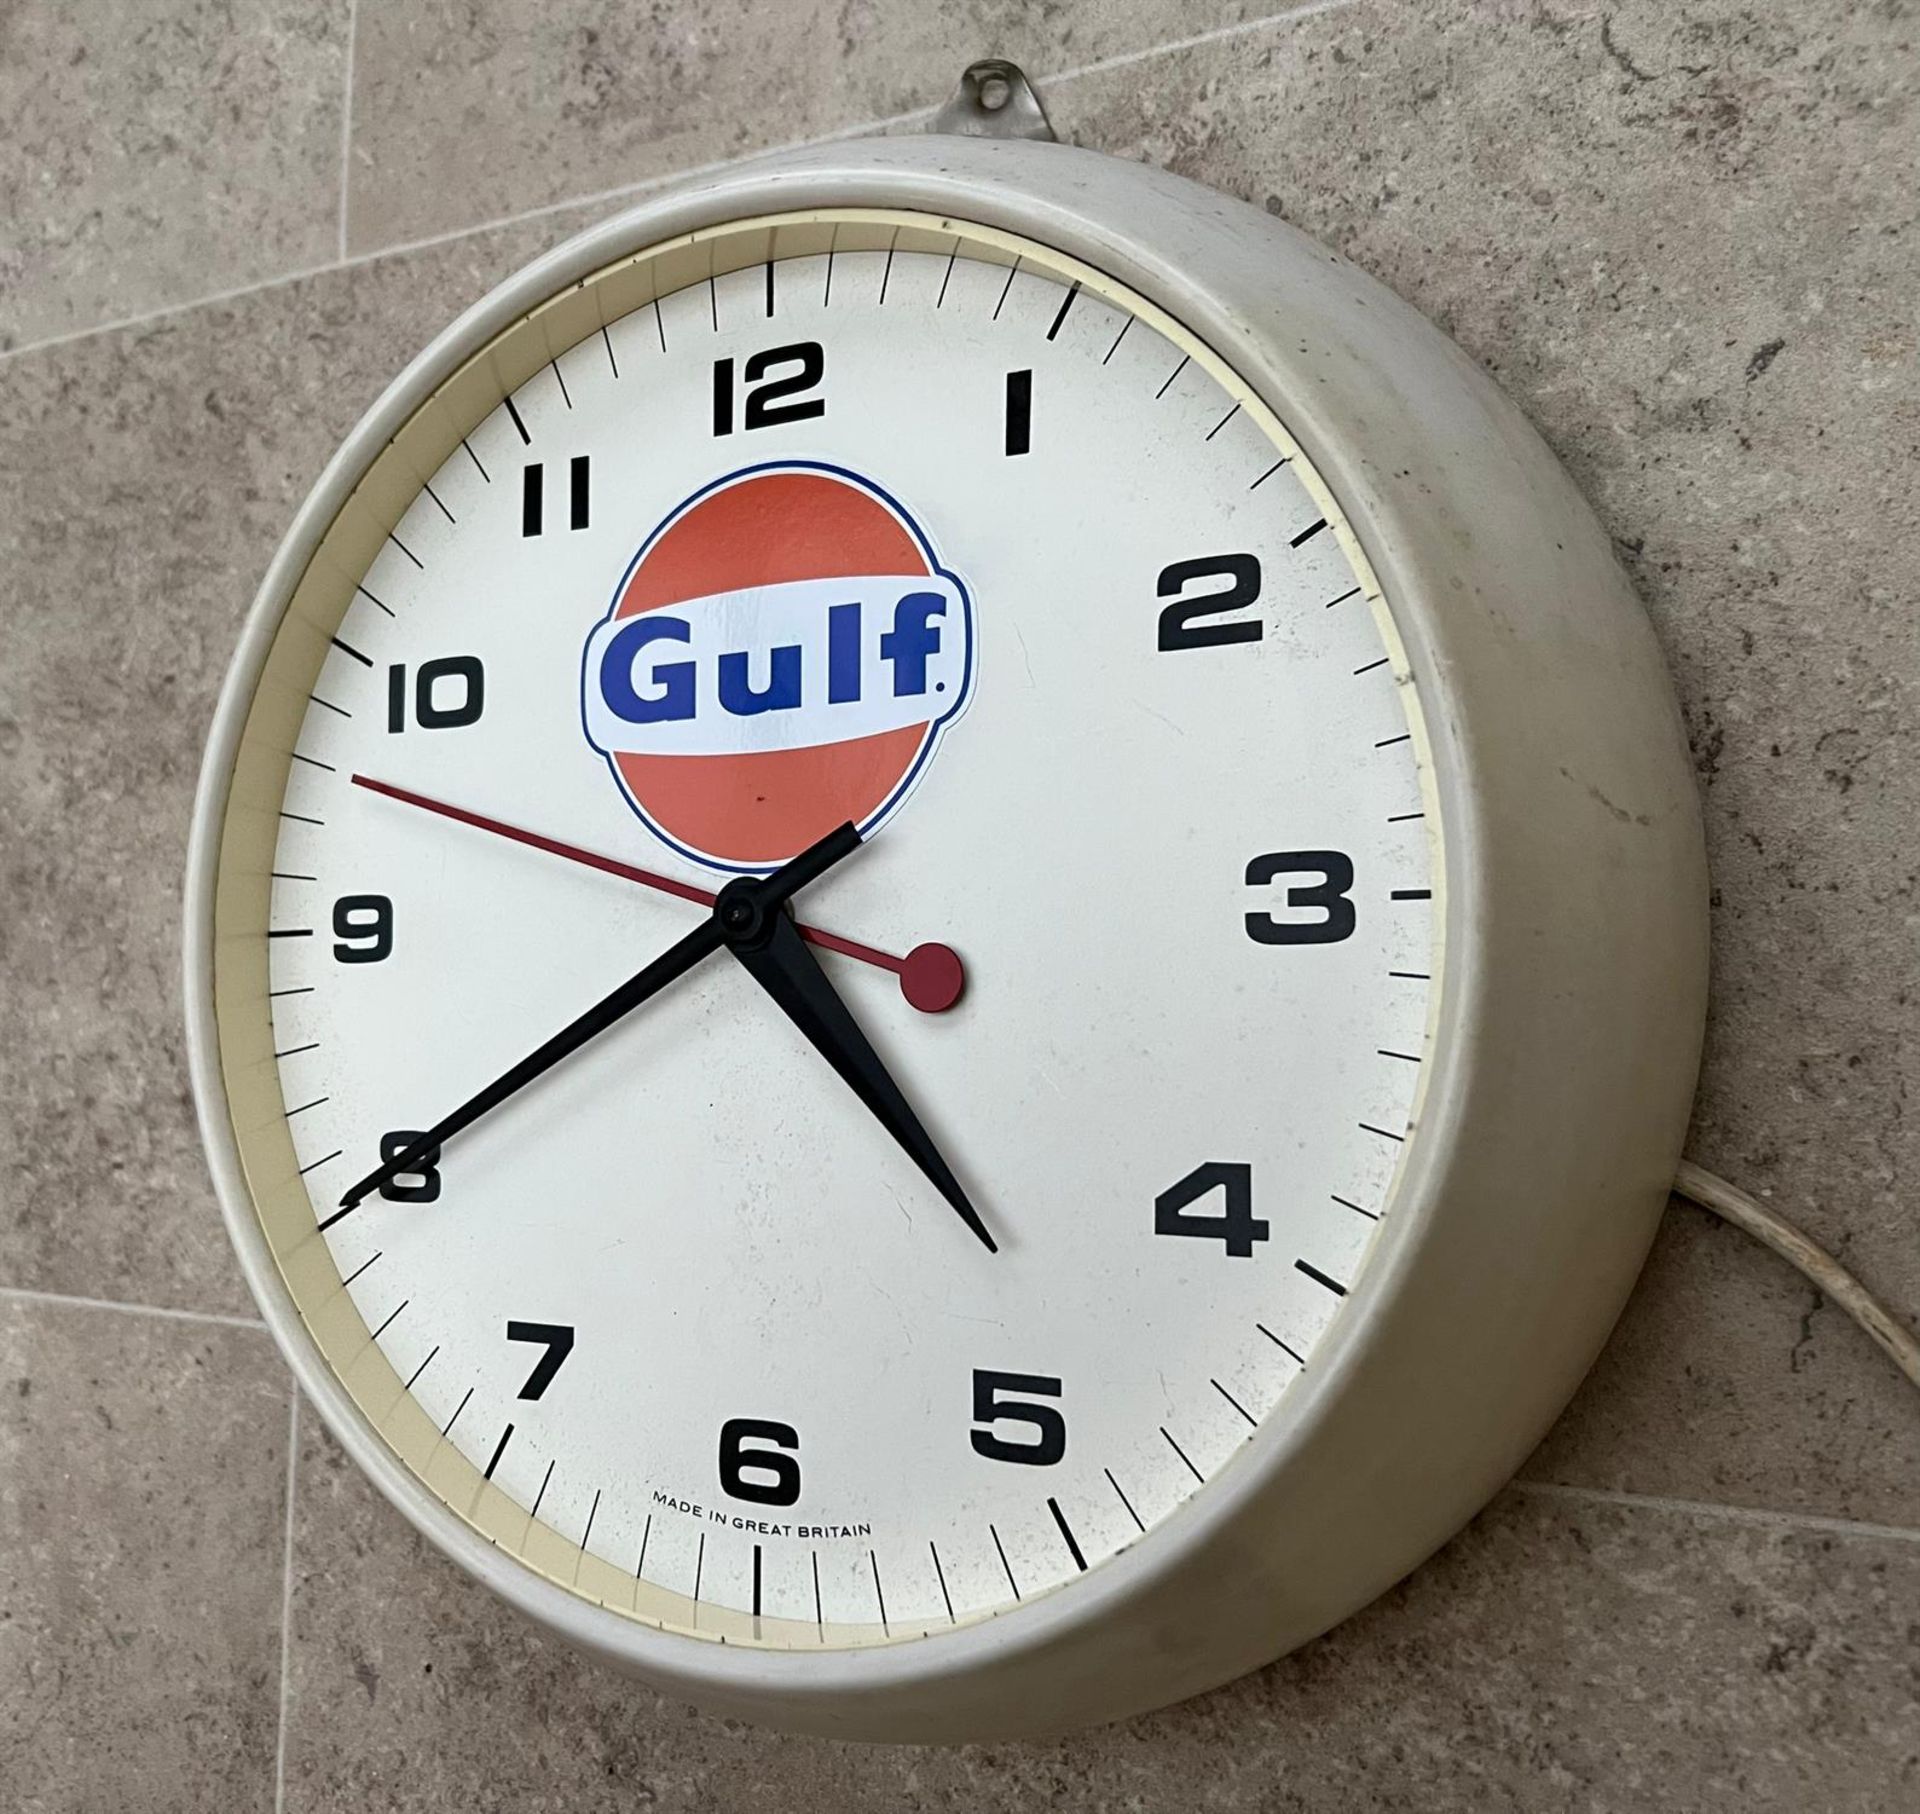 An Original Smiths 9" Gulf-Themed Wall Clock c.1970s - Image 8 of 8